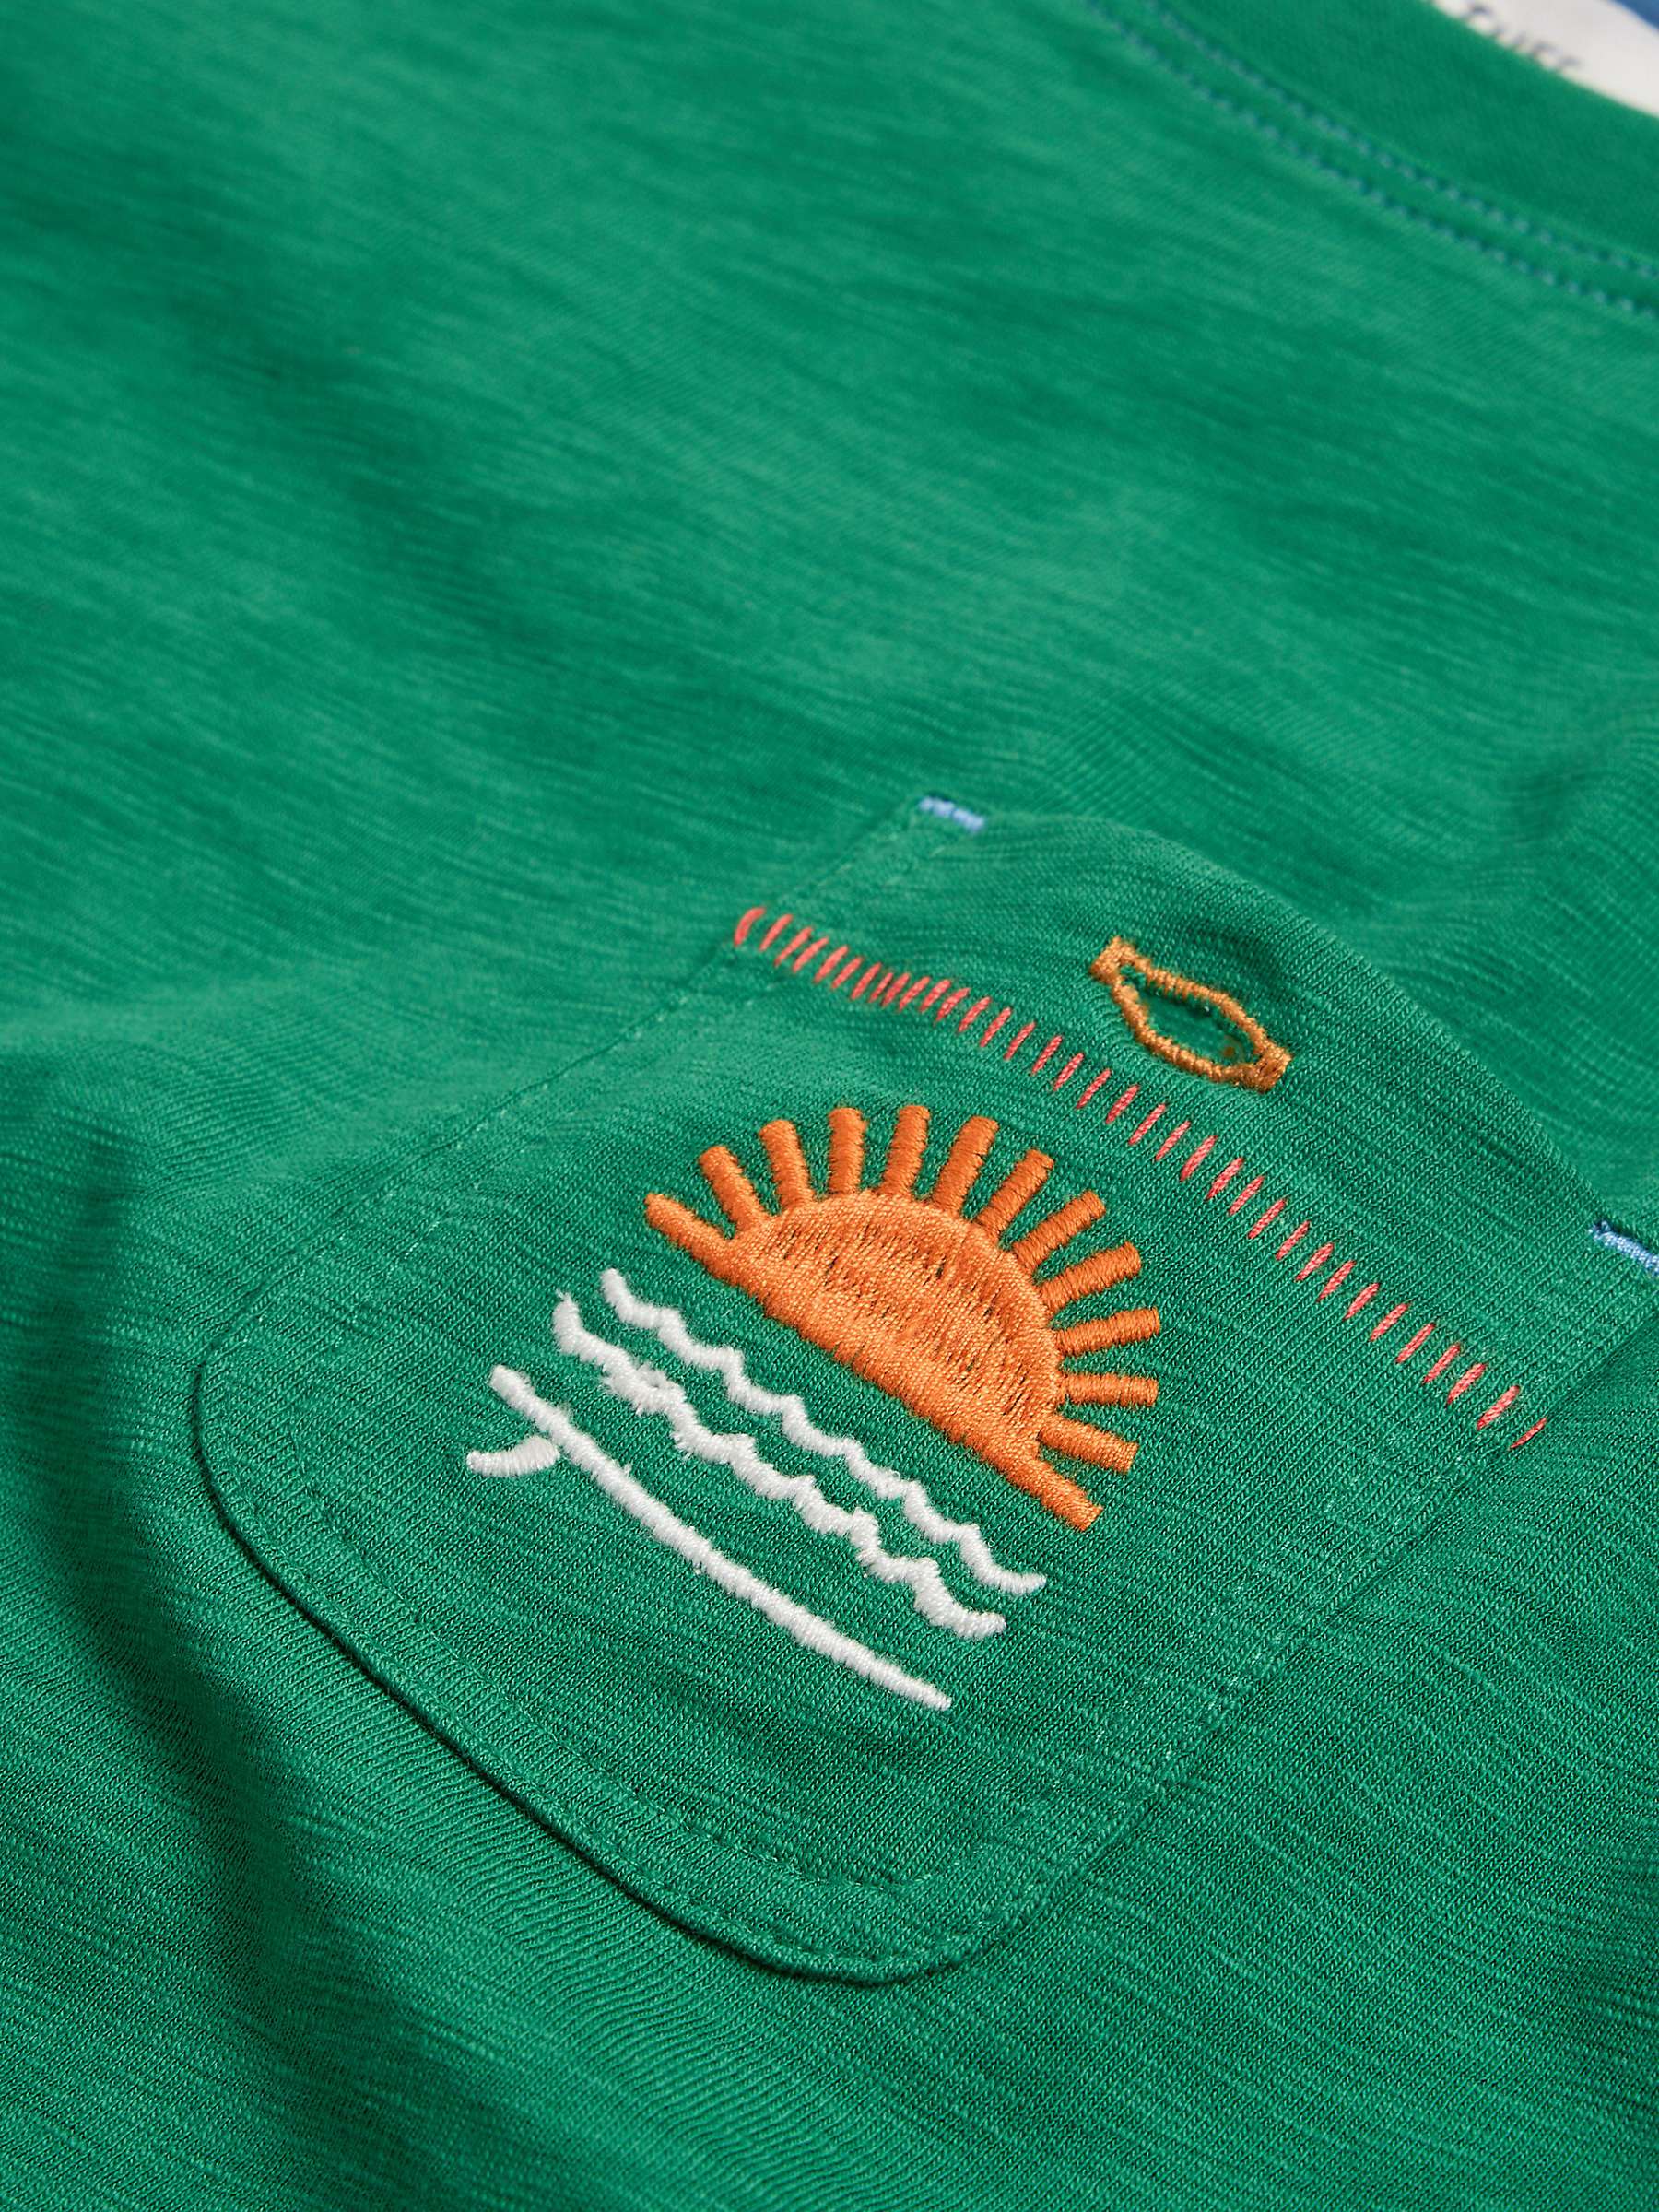 Buy White Stuff Kids' Surfers Graphic T-Shirt, Green Online at johnlewis.com